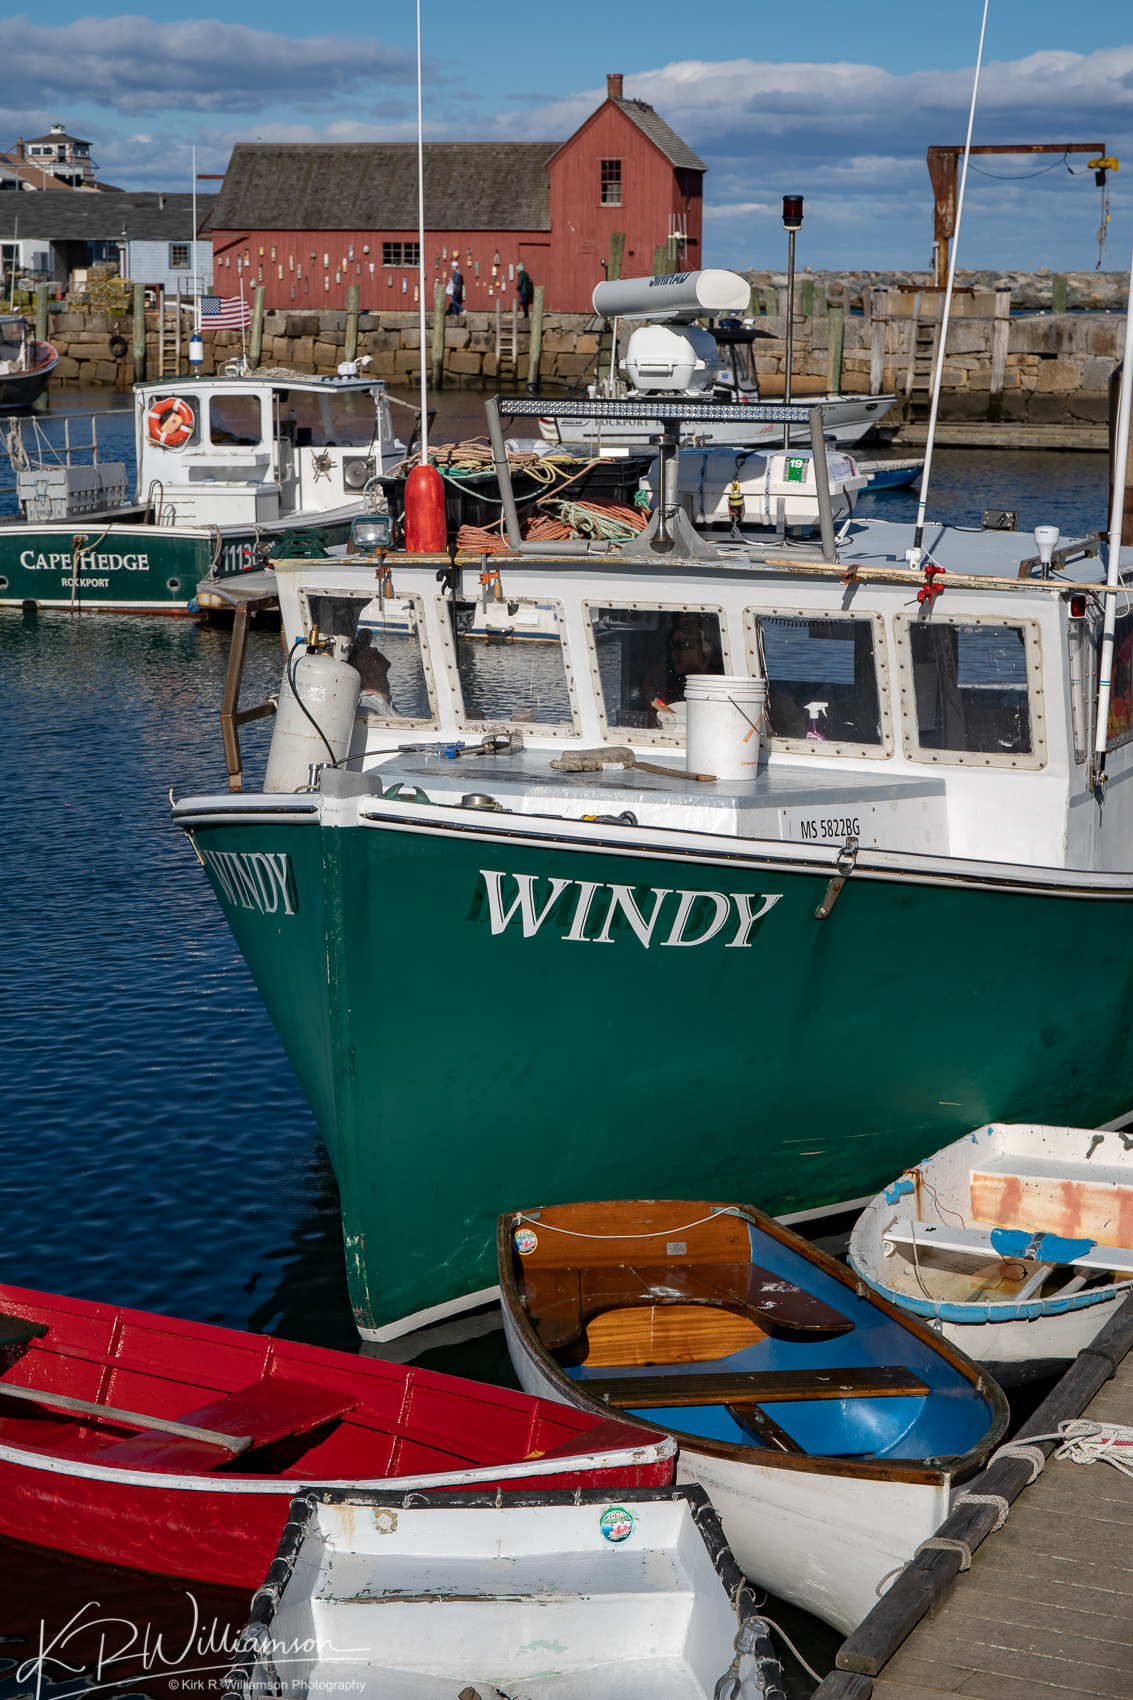 Lobster boat and Motif. Canon 24-70 f4L @70mm